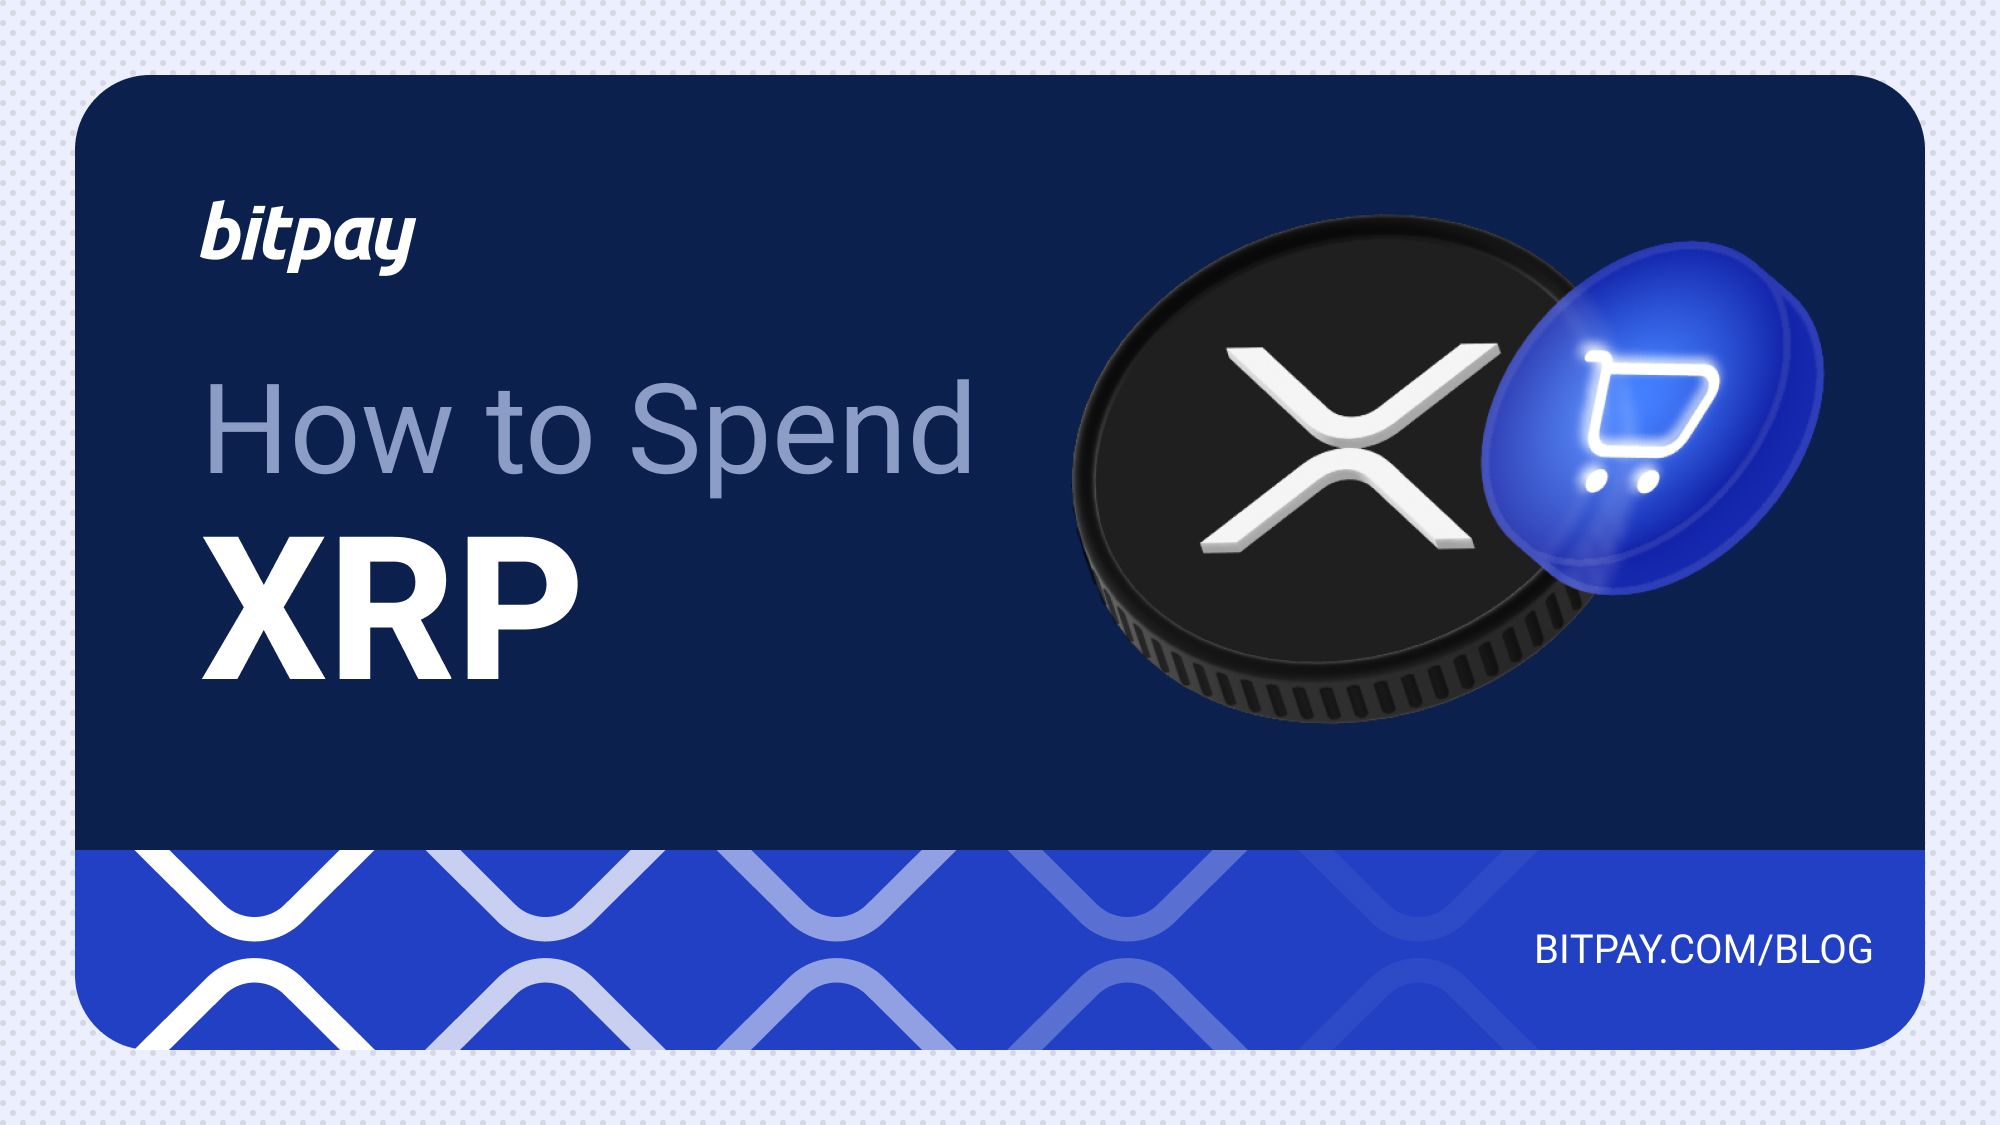 XRP Now Accepted As Payment Method Across Hundreds of Stores Worldwide